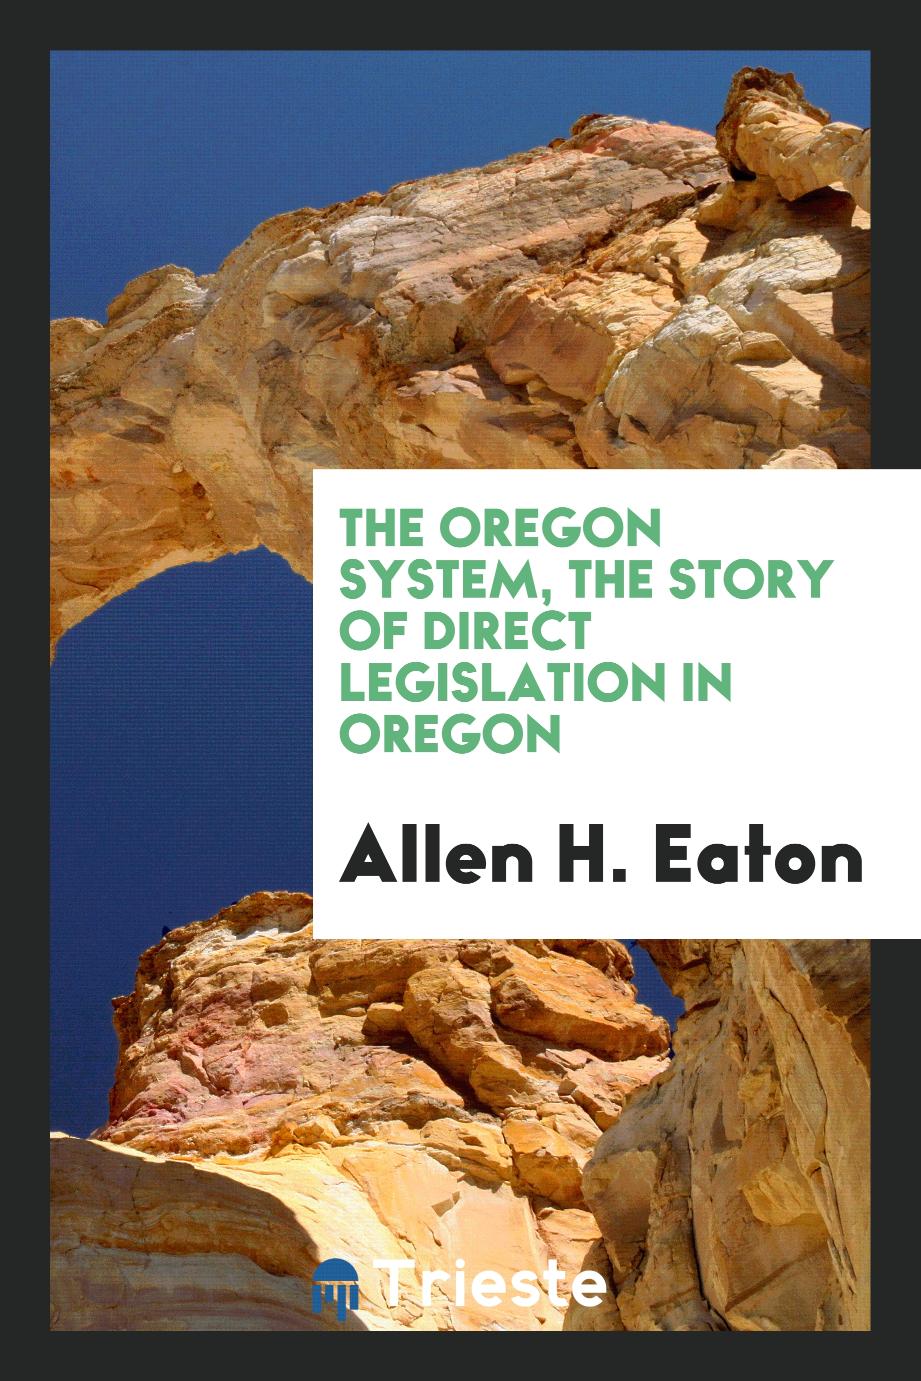 The Oregon System, the Story of Direct Legislation in Oregon